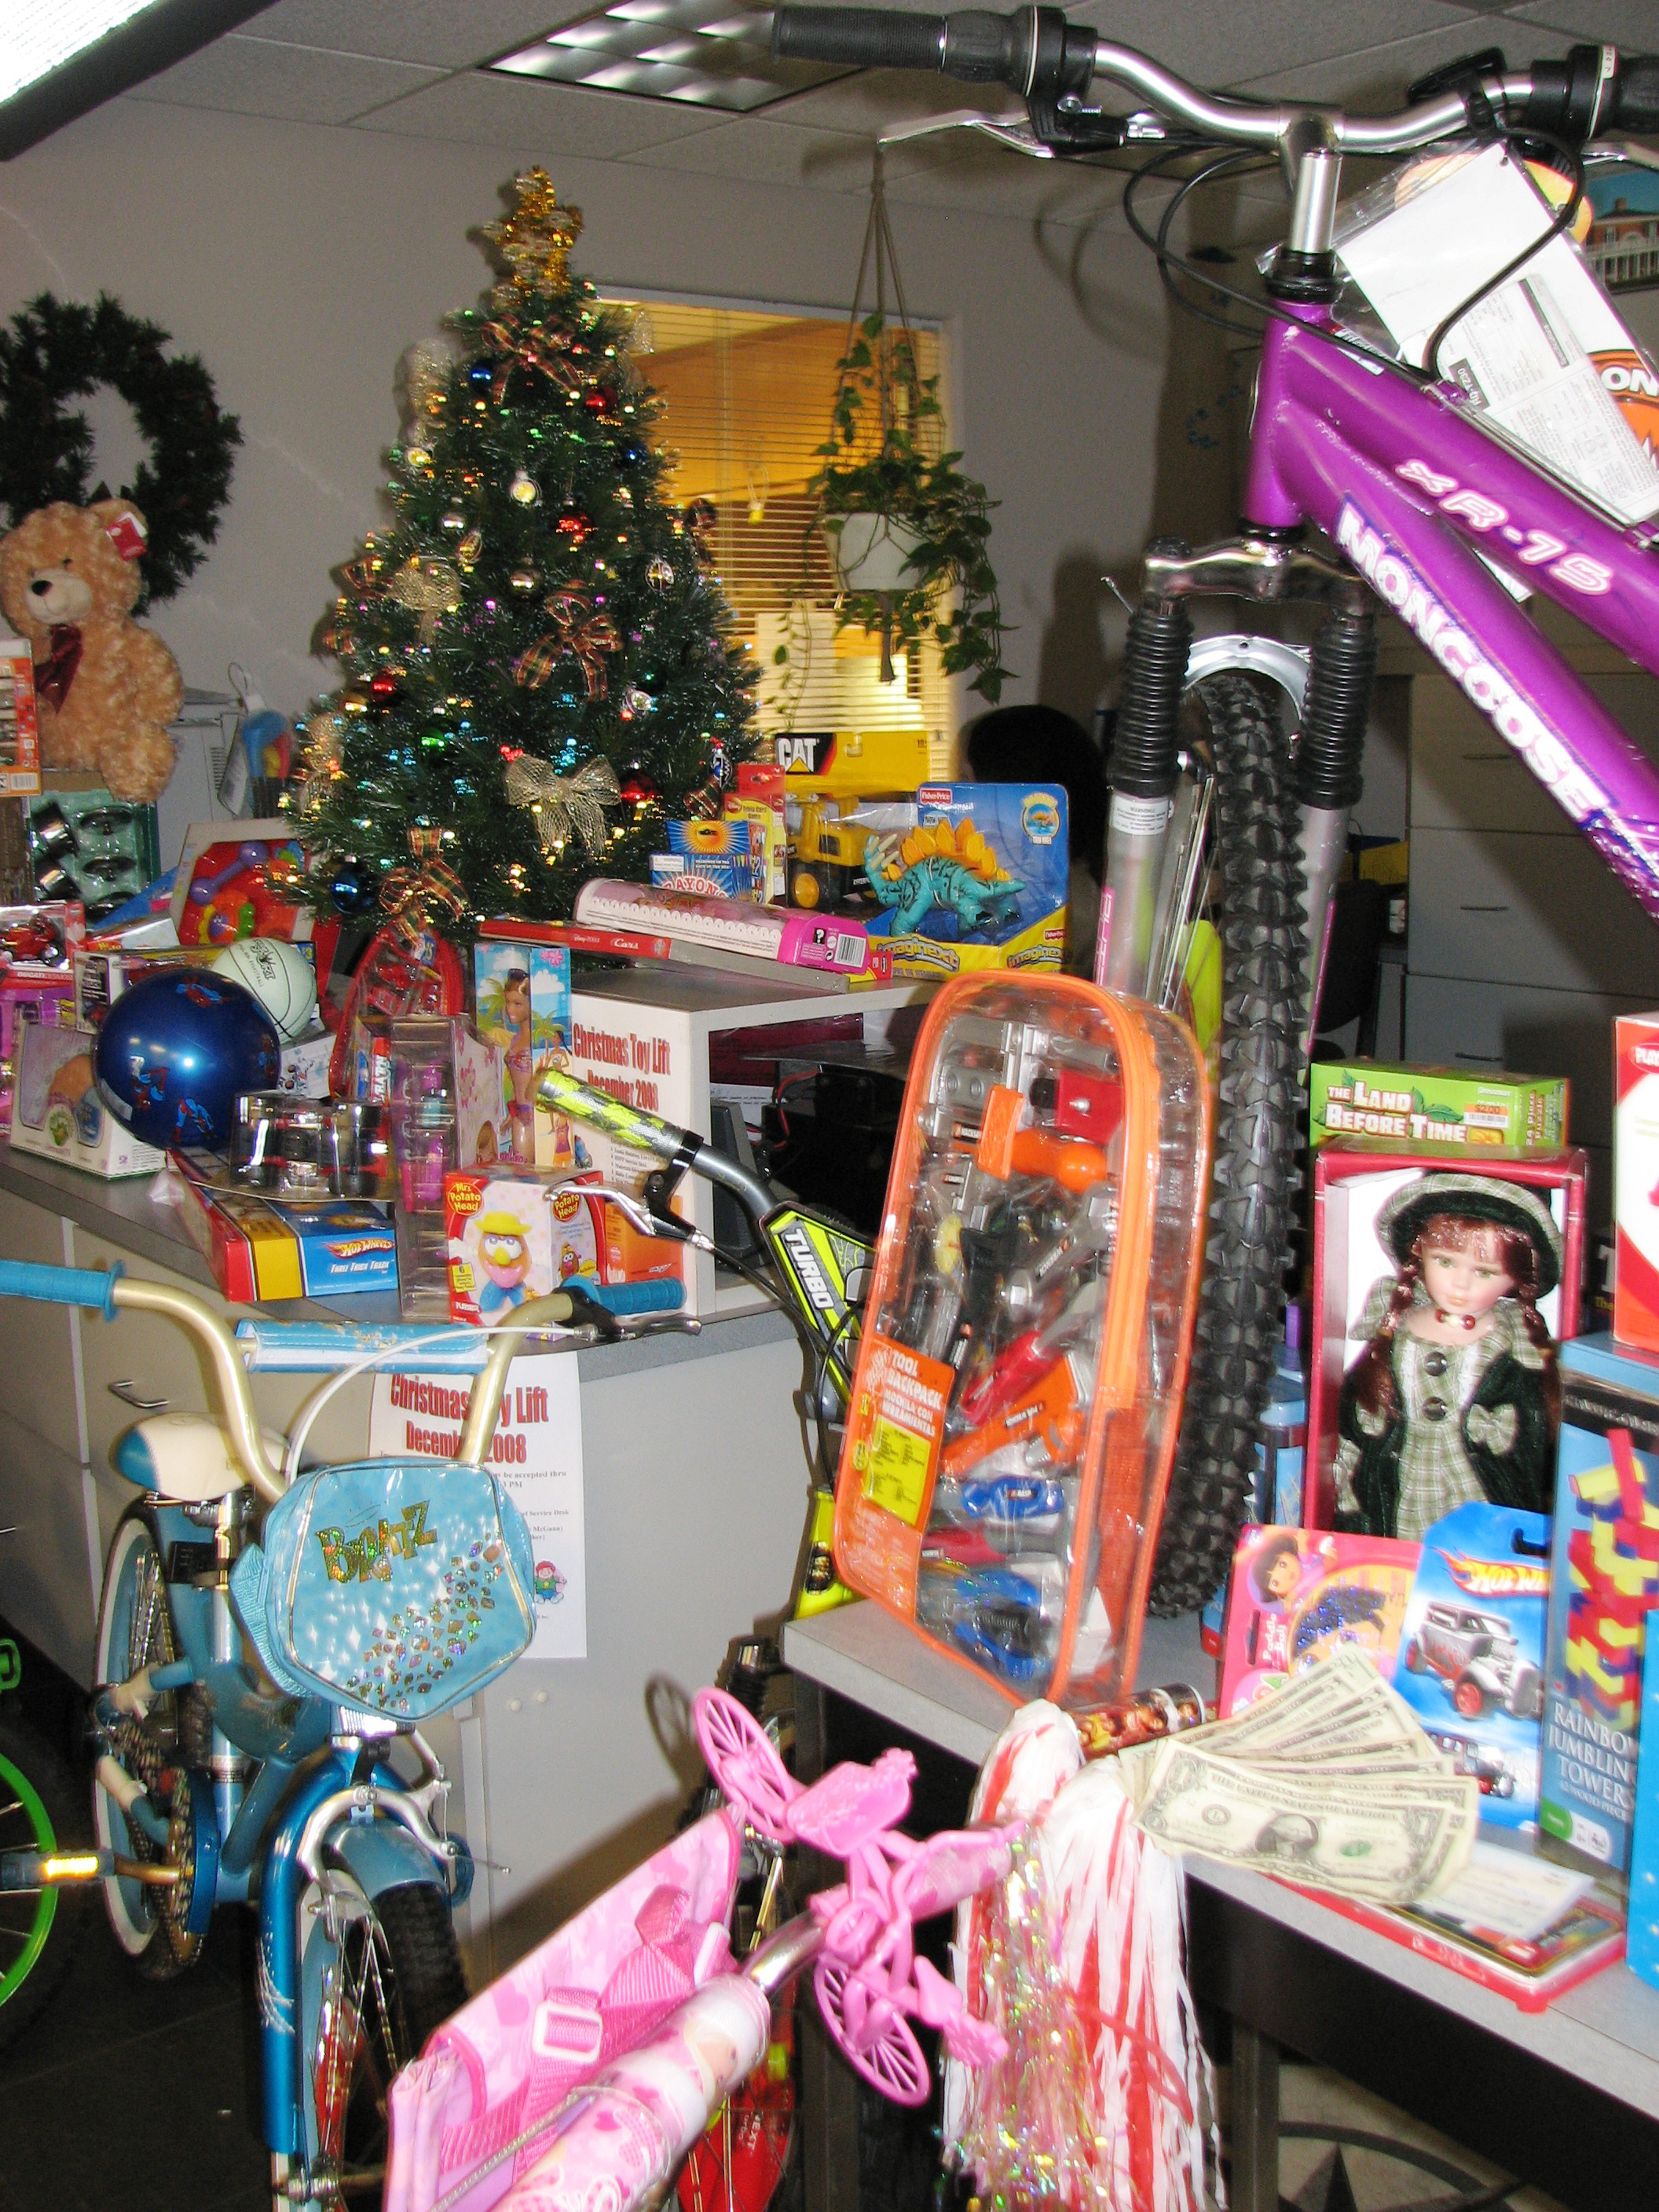 Toy donations in a pile at a Christmas Tree